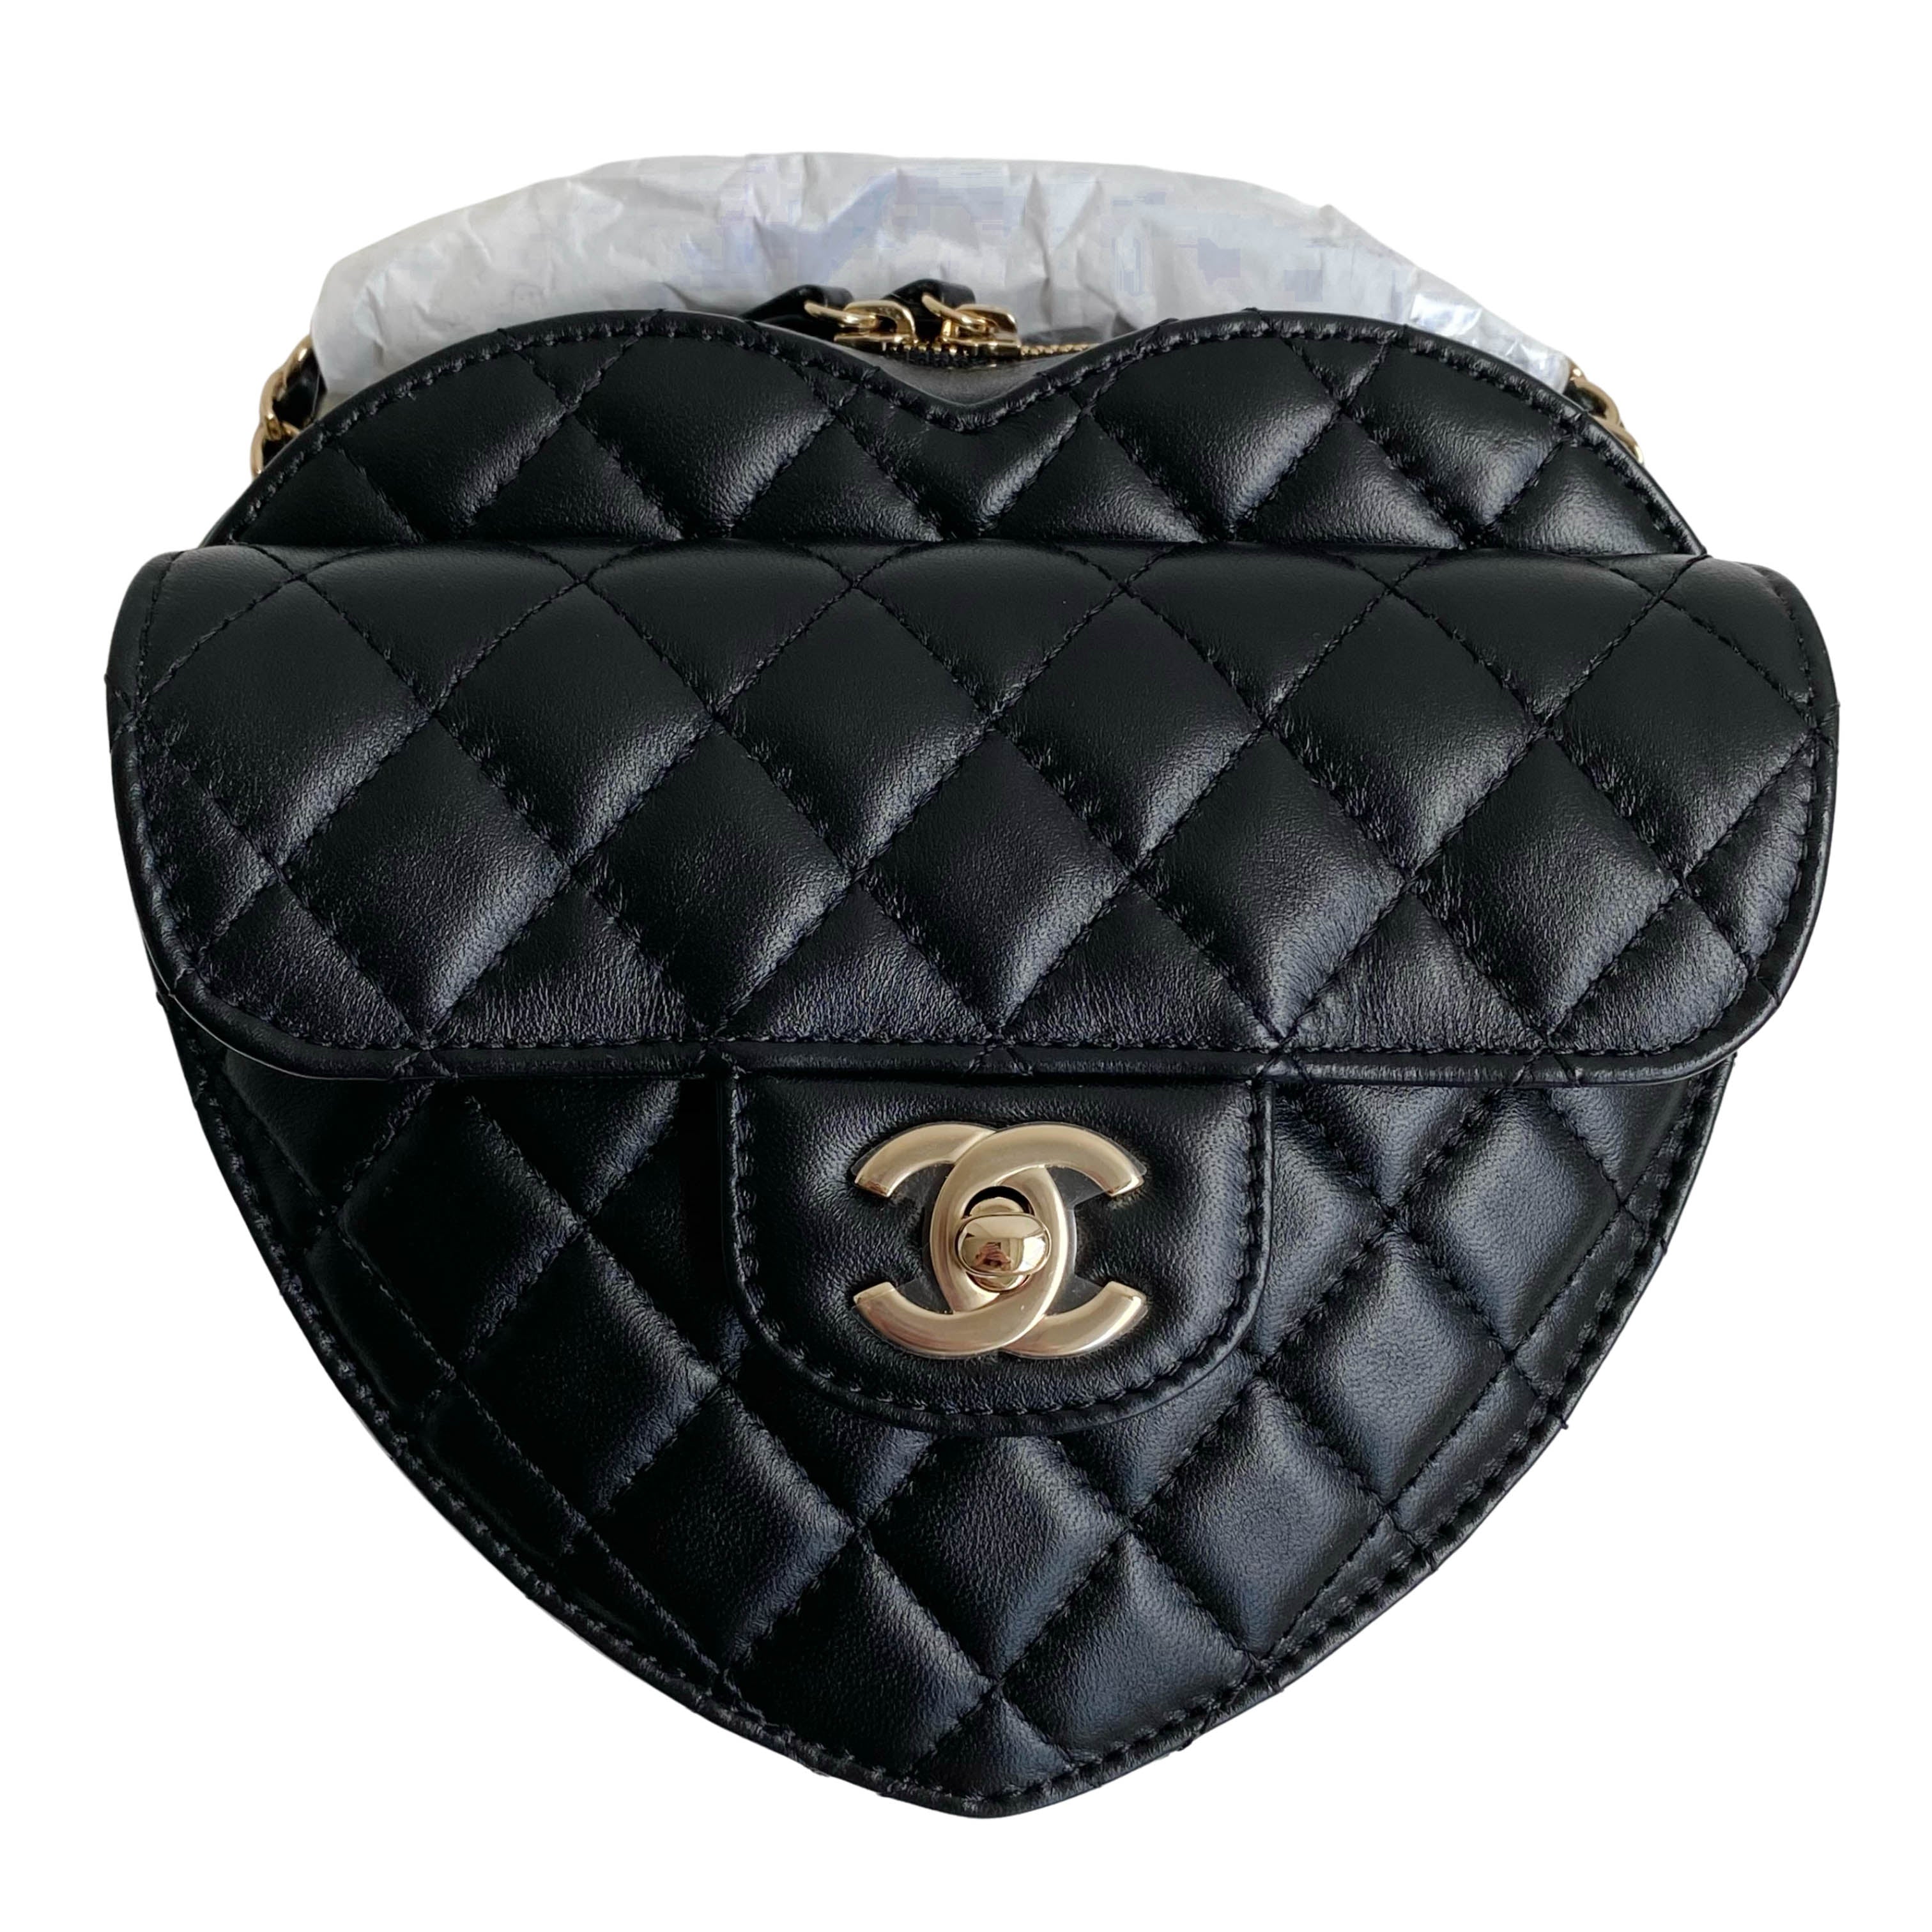 Chanel Heart Bag - Price, Launch Date & More - Luxe Front